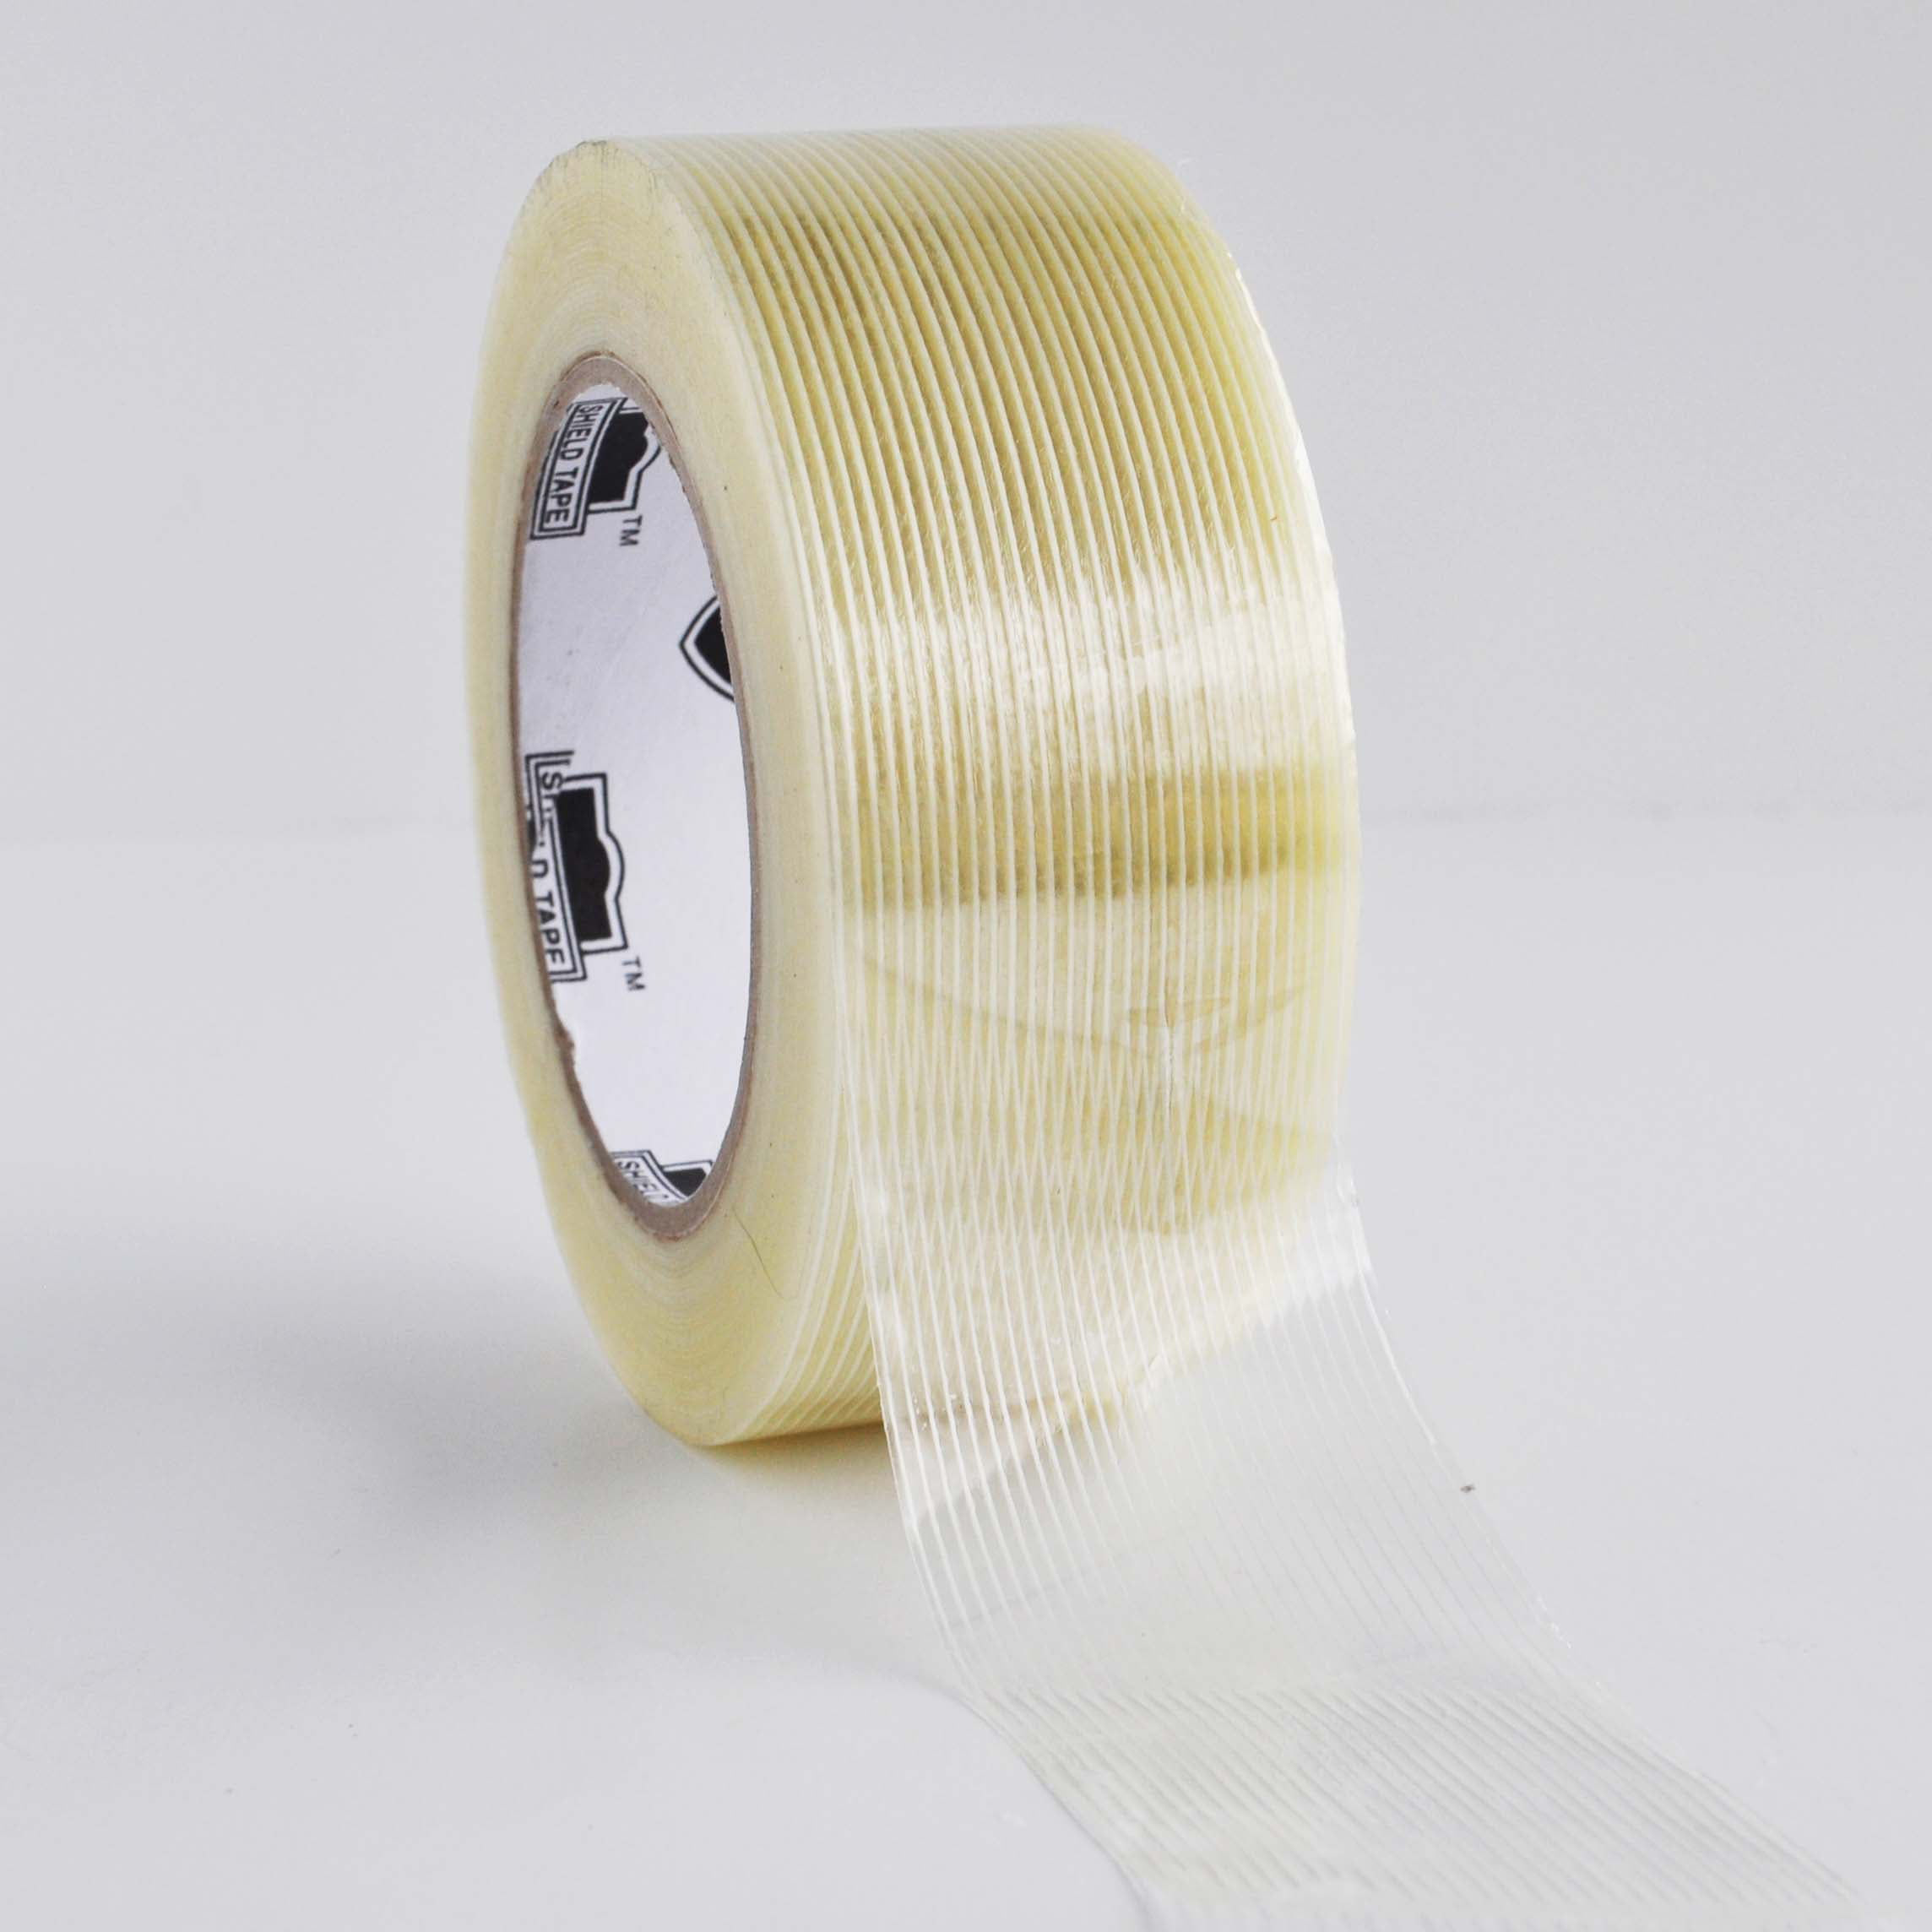 WOD Filament Strapping Reinforced Tape 12-Rolls 3/4 inch x 60 yds 